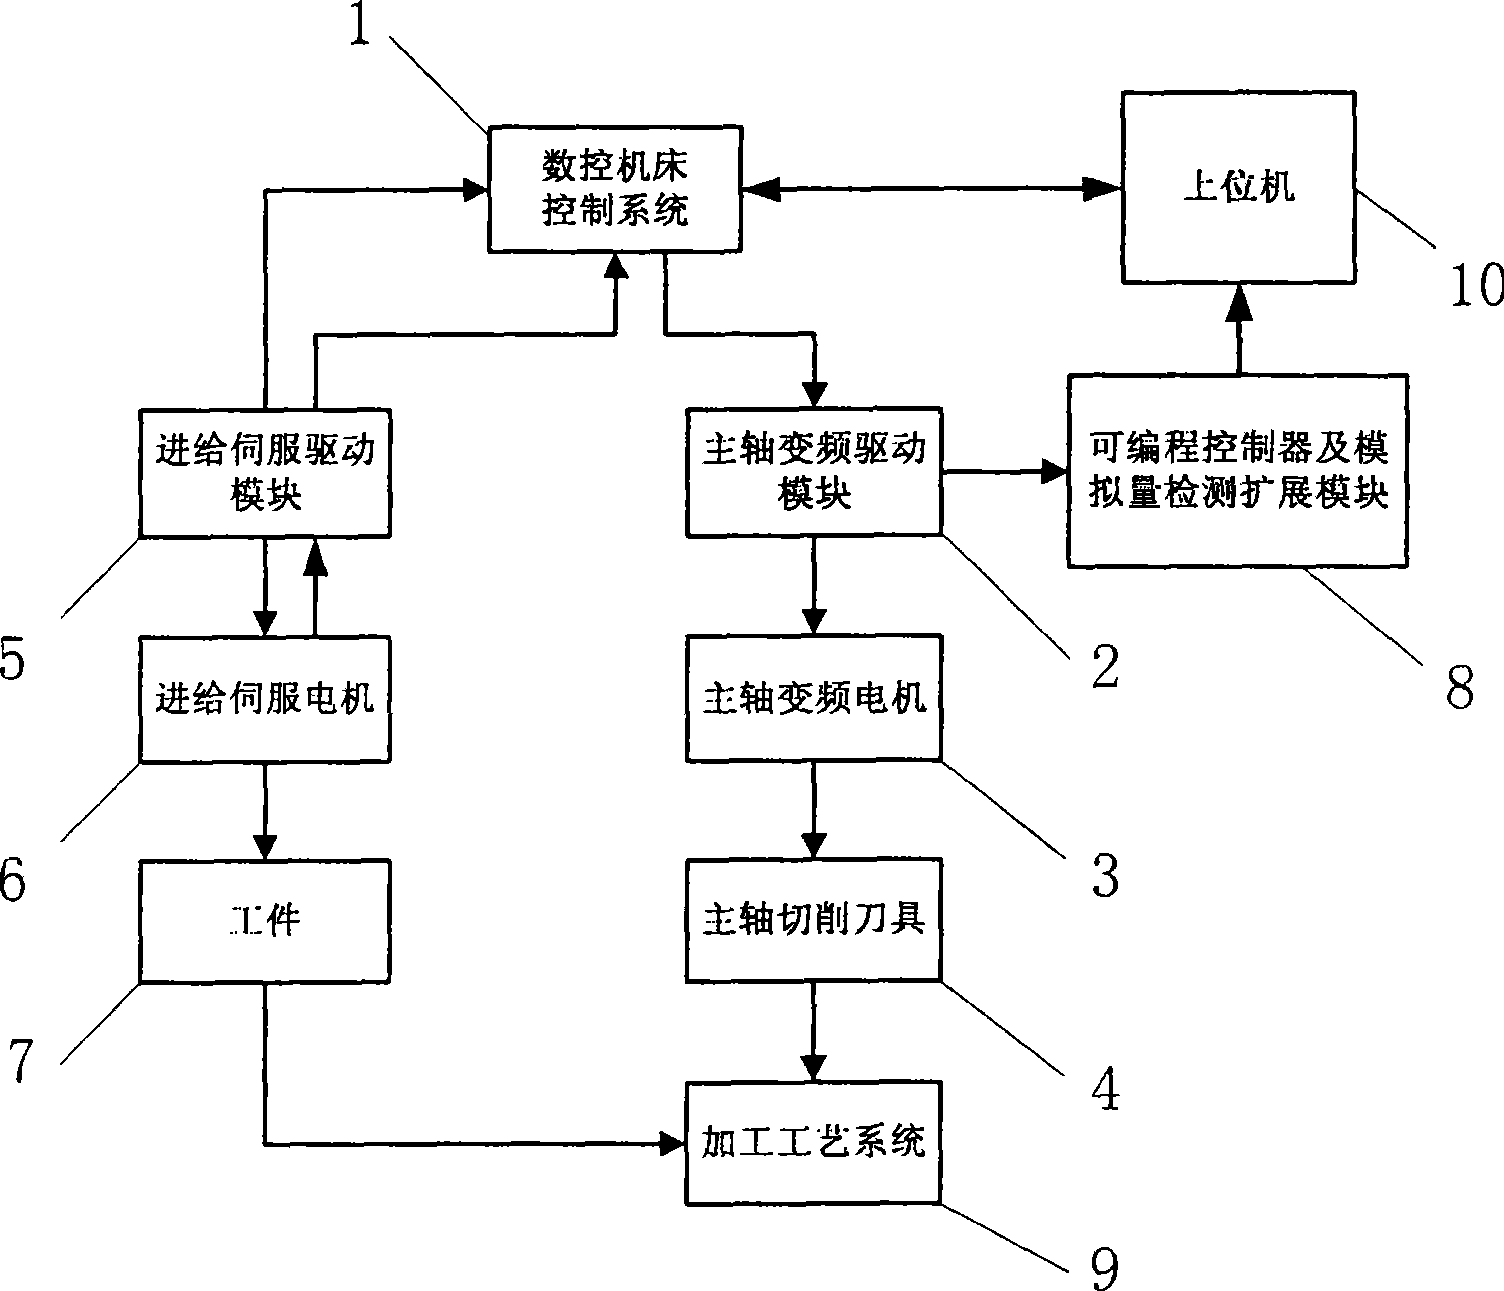 Real-time monitoring system for cutting principal shaft of numerical control gear milling machine tool